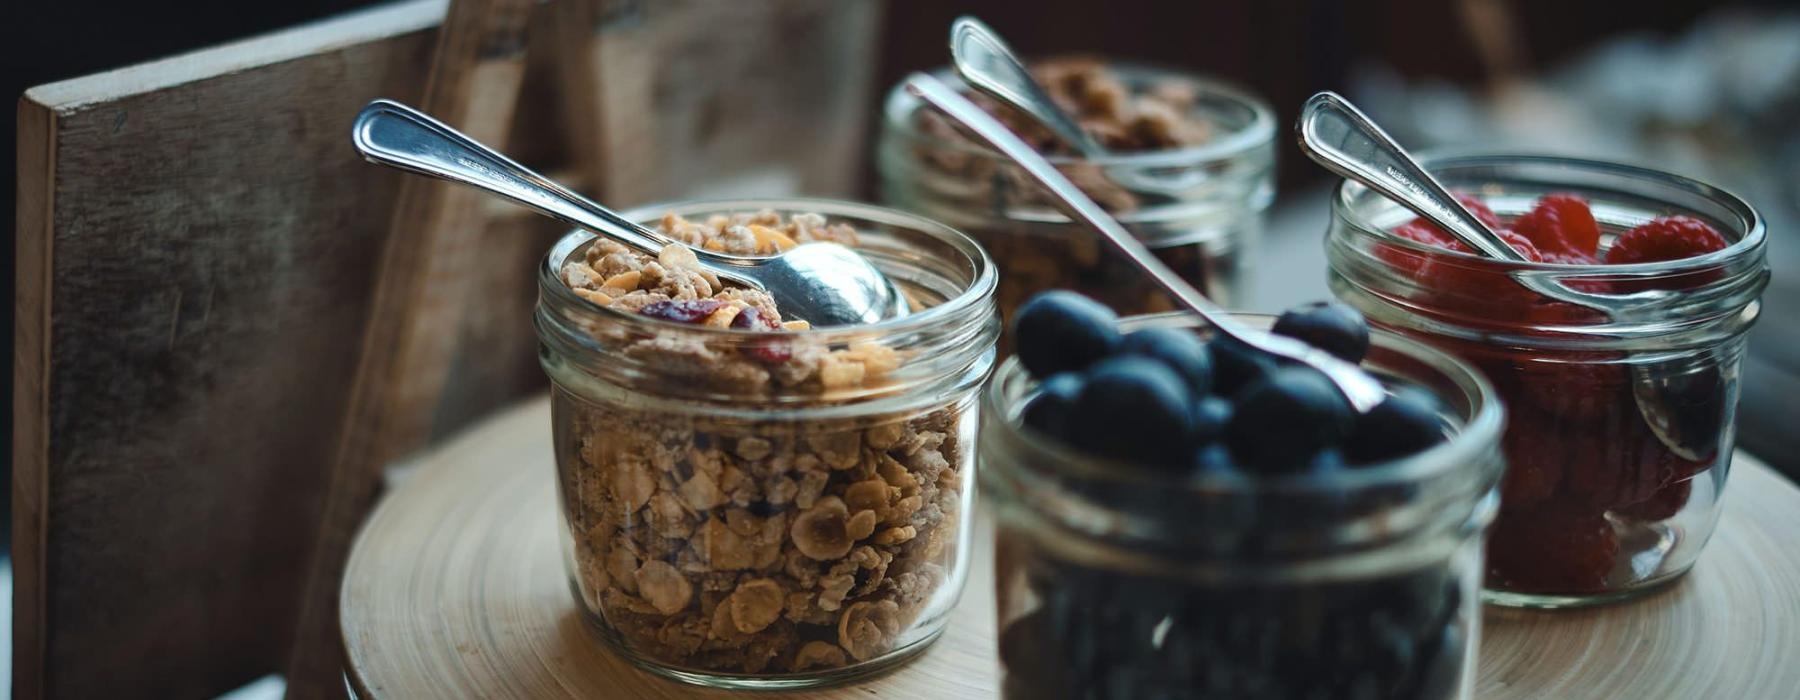 granola and fruit filled jars with spoons on a table